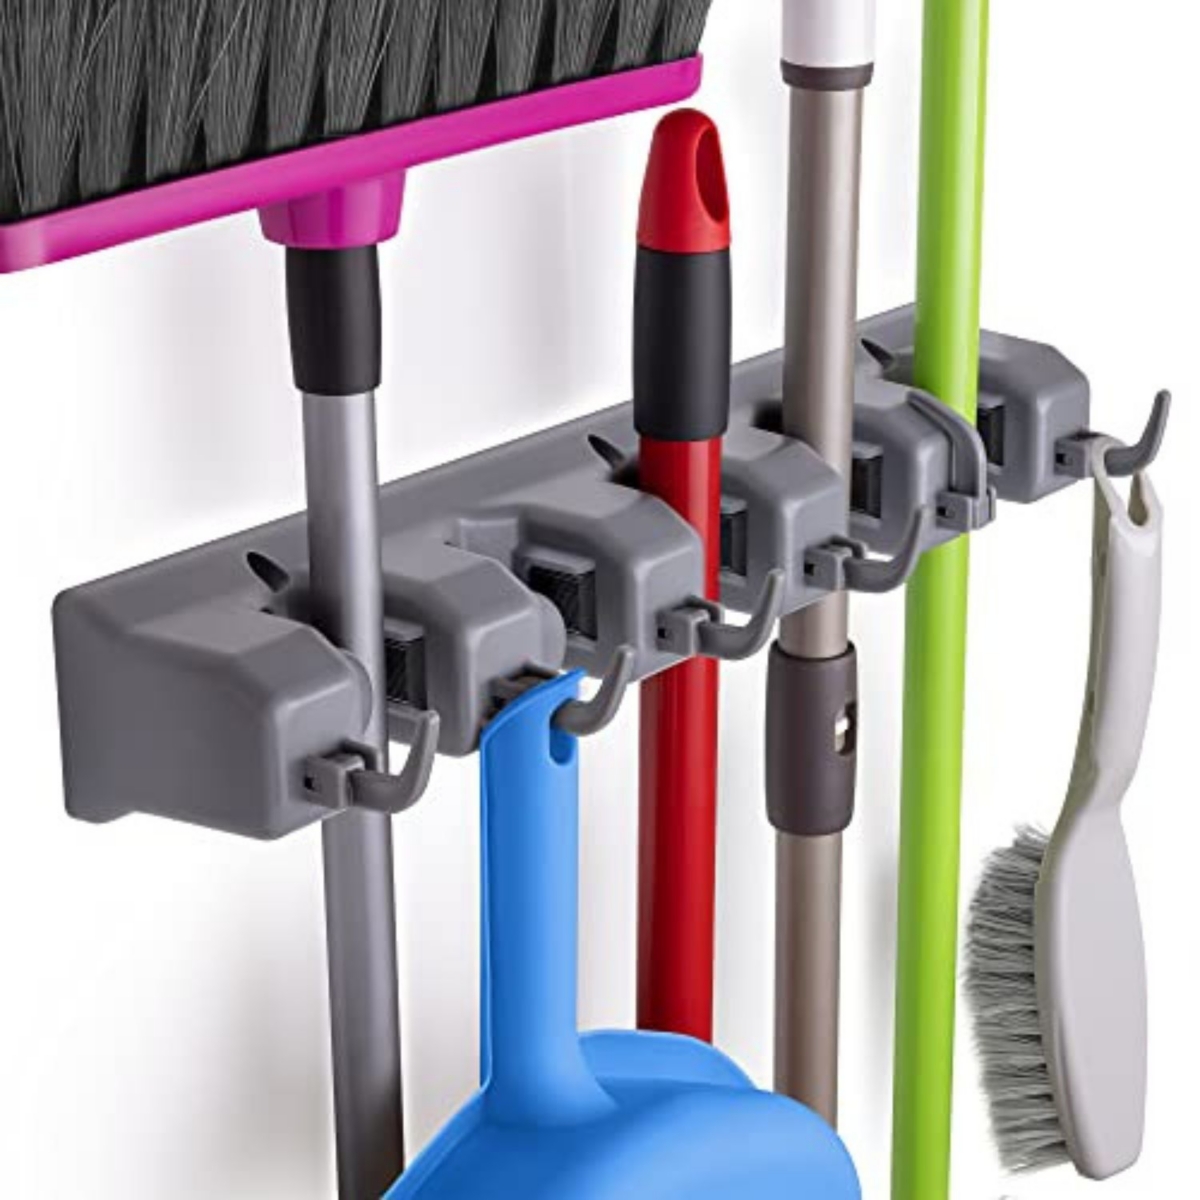 5 Slots Mop and Broom Organizer Wall Mount - Mounting Hardware Included - White